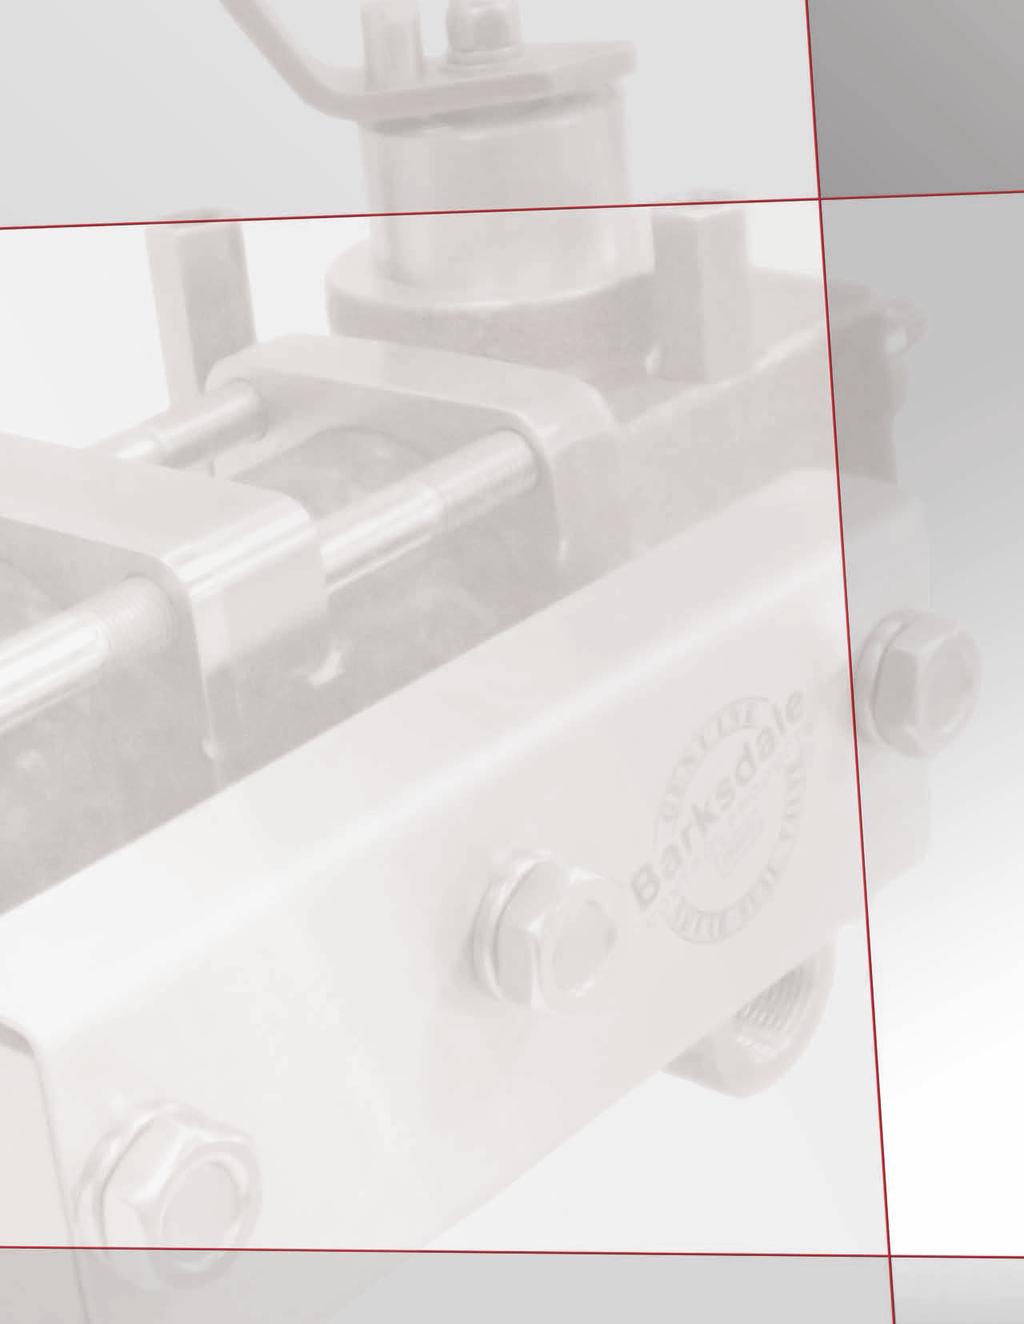 Shear-Seal Barksdale - The Solution Barksdale - Proven Reliability For over 65 years, Barksdale s revolutionary Shear-Seal valve design has been recognized as the industry standard for demanding